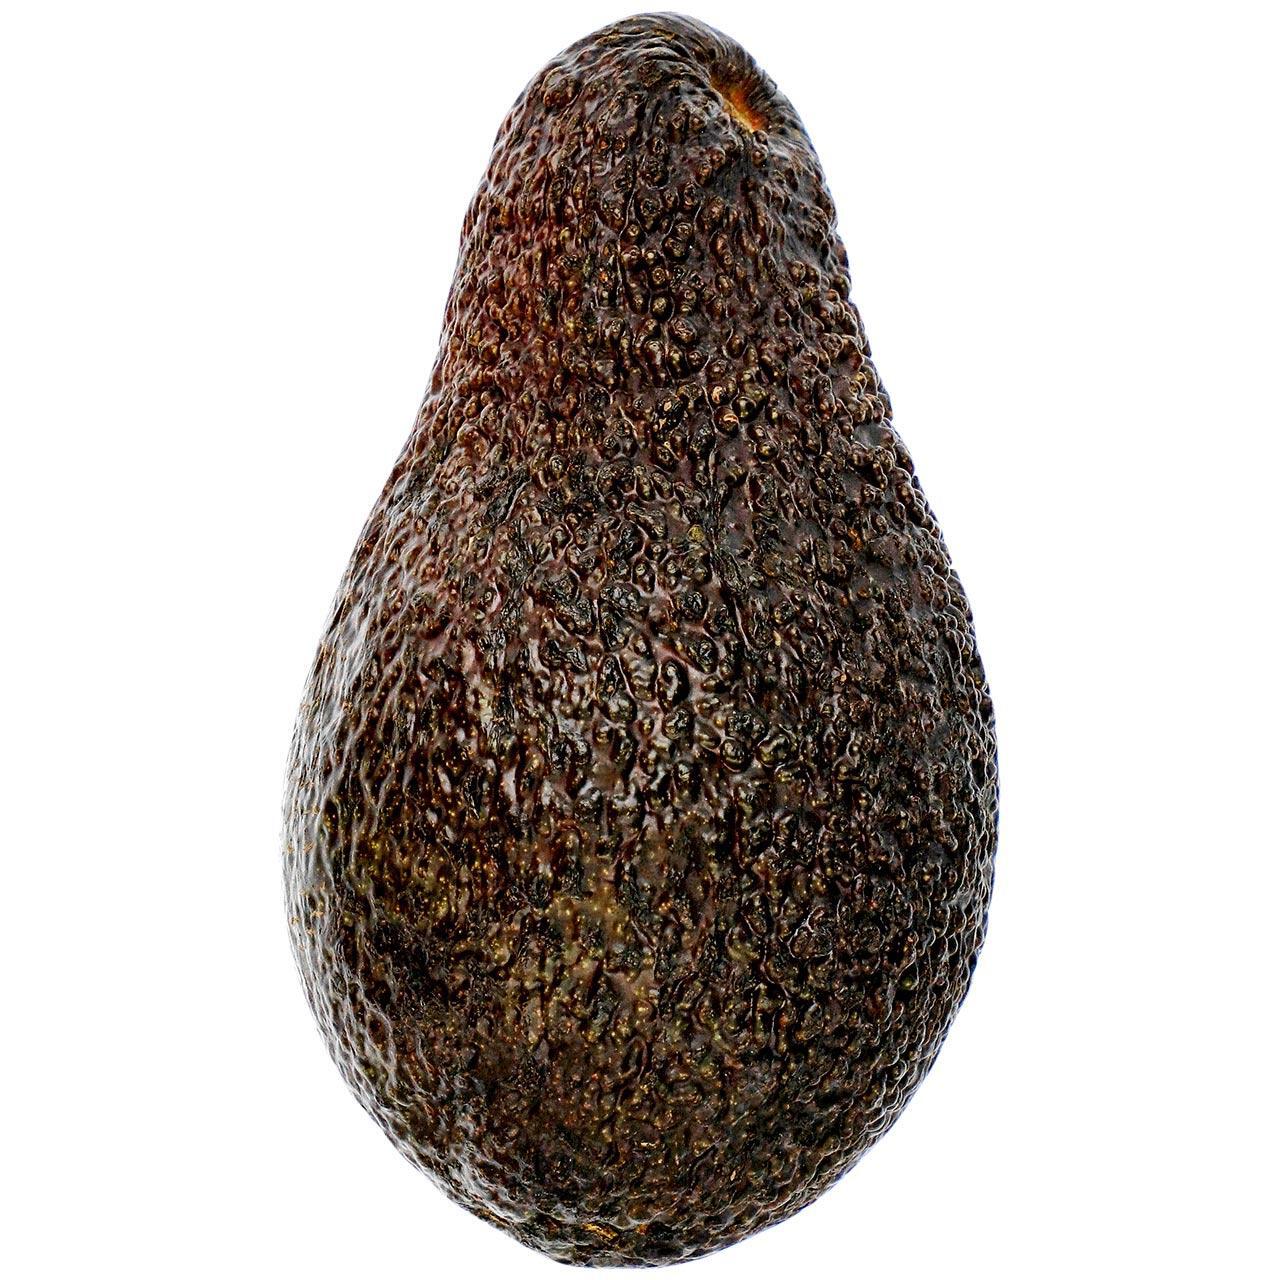 M&S Perfectly Ripe Large Hass Avocado